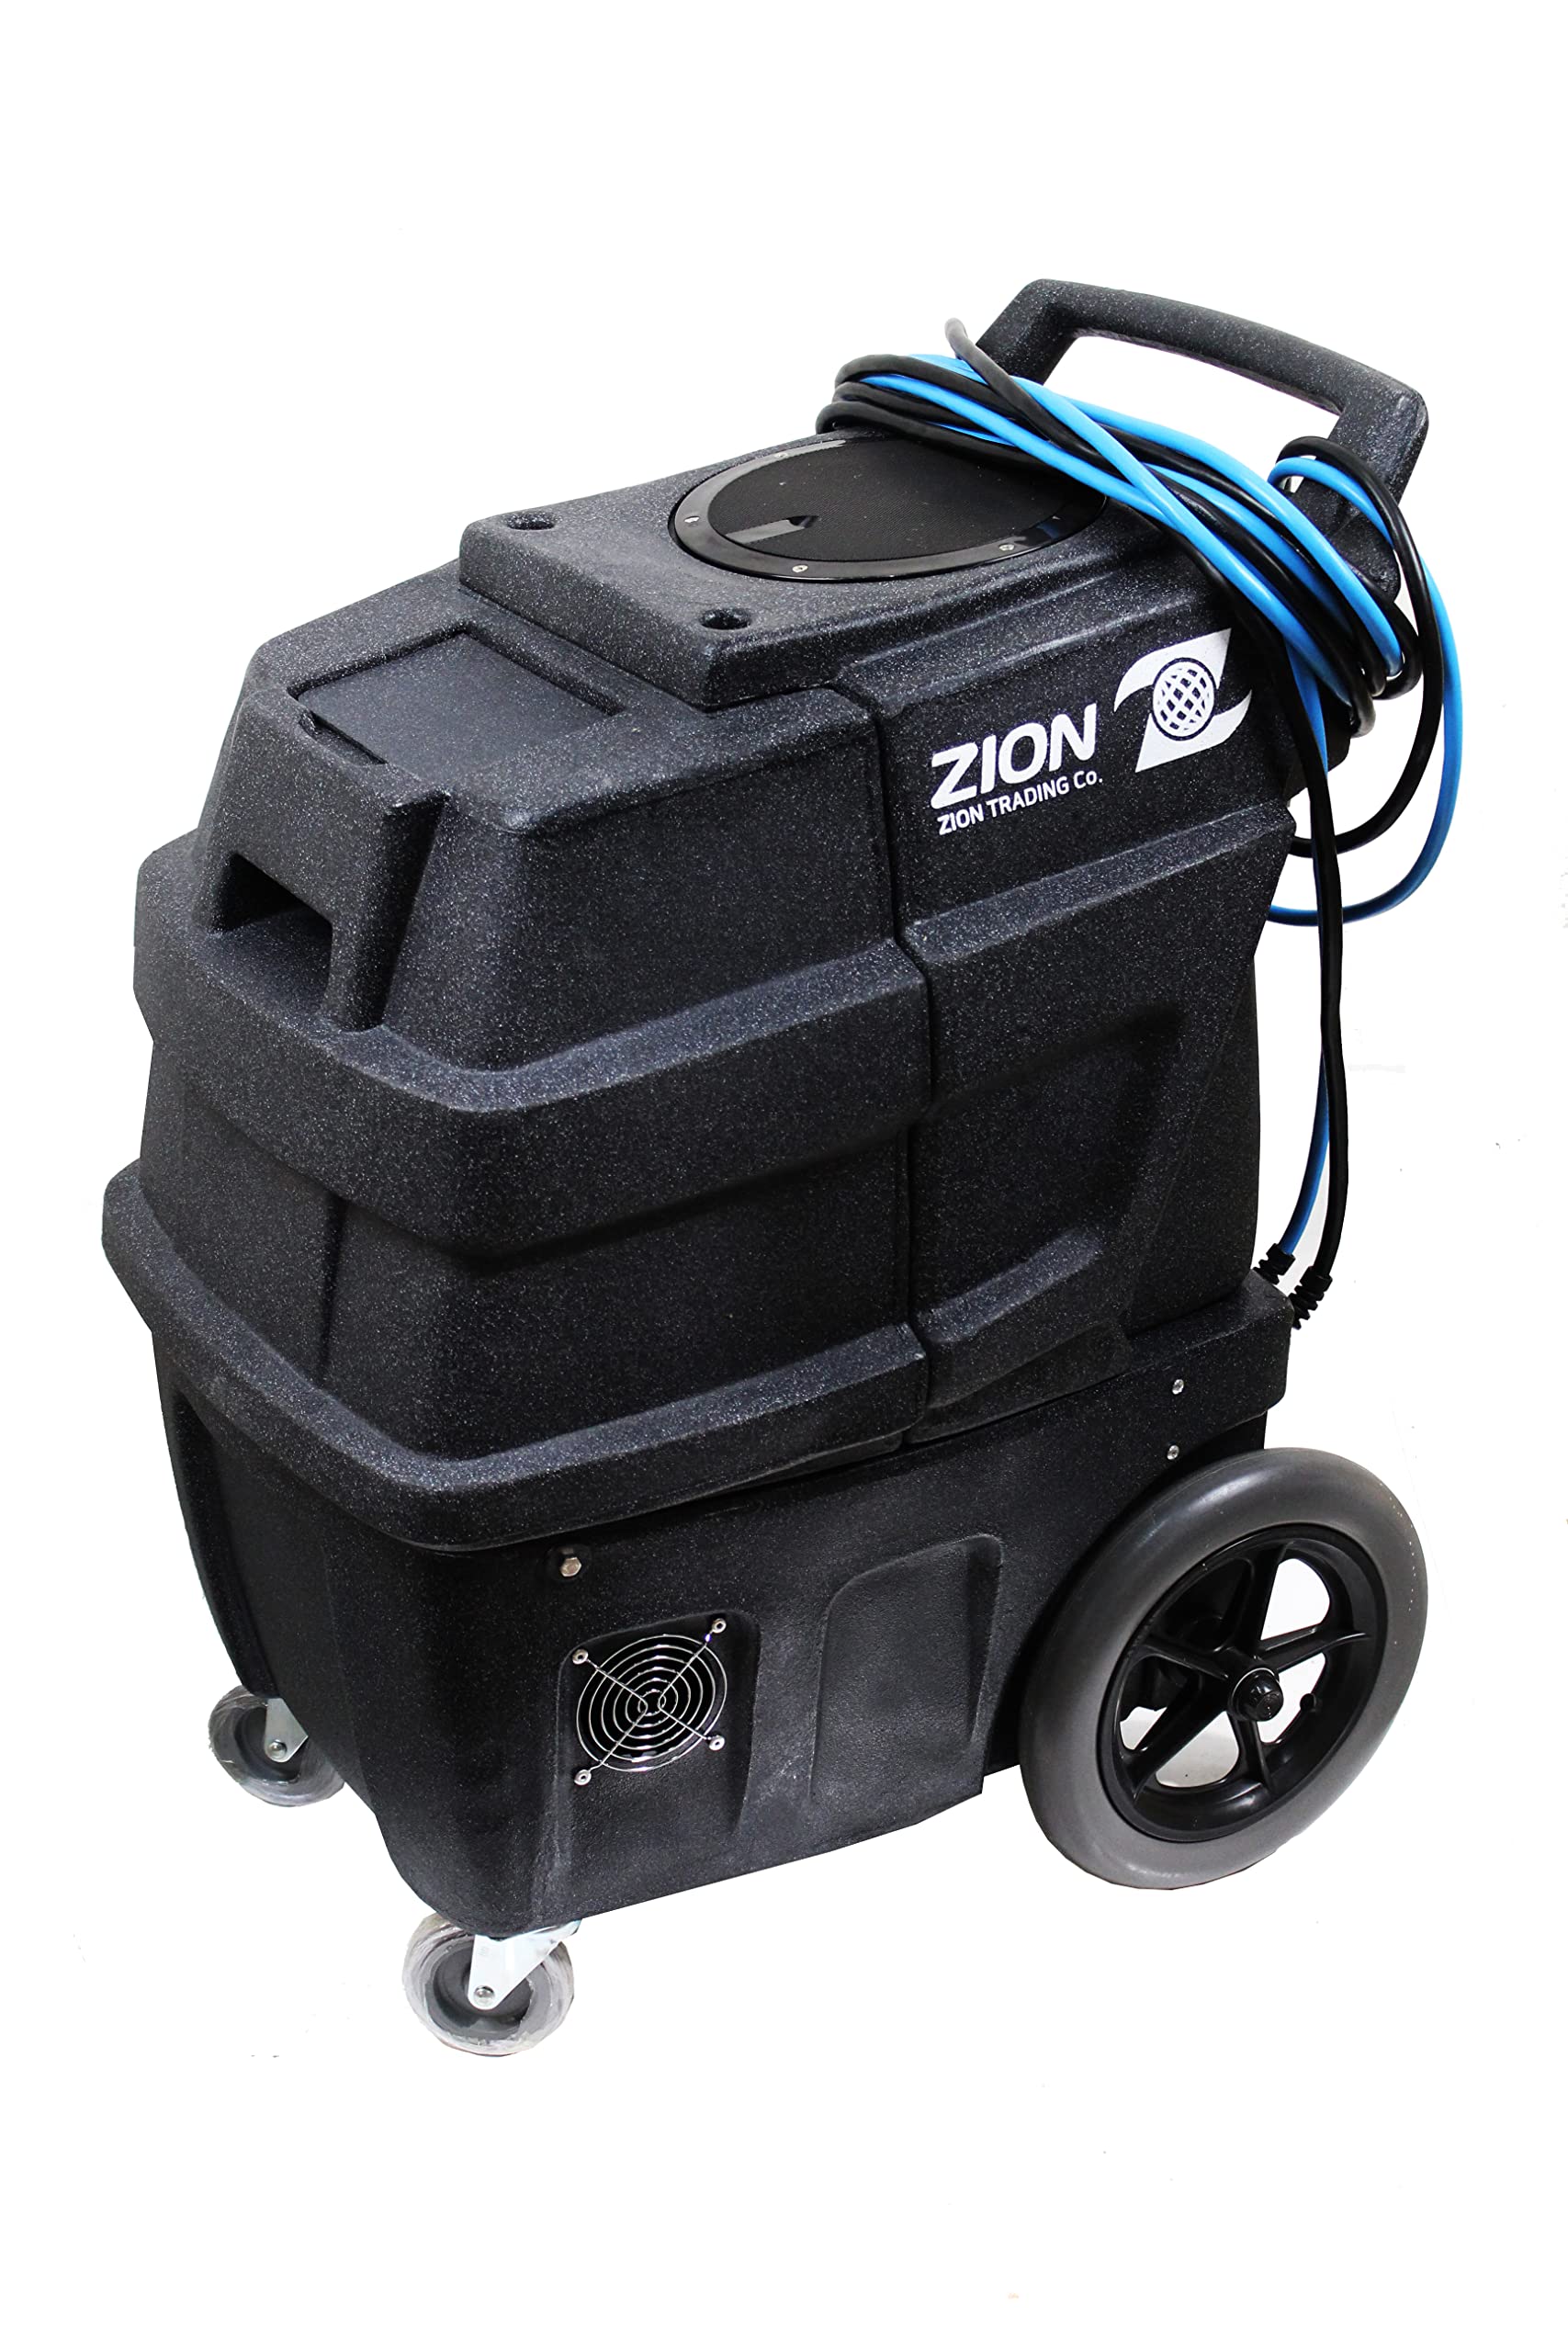 ZION 500 psi Rhino Carpet Extractor Wand and Hose included!, 36 inch x 21 inch x 28 inch (RH-3500-XG)